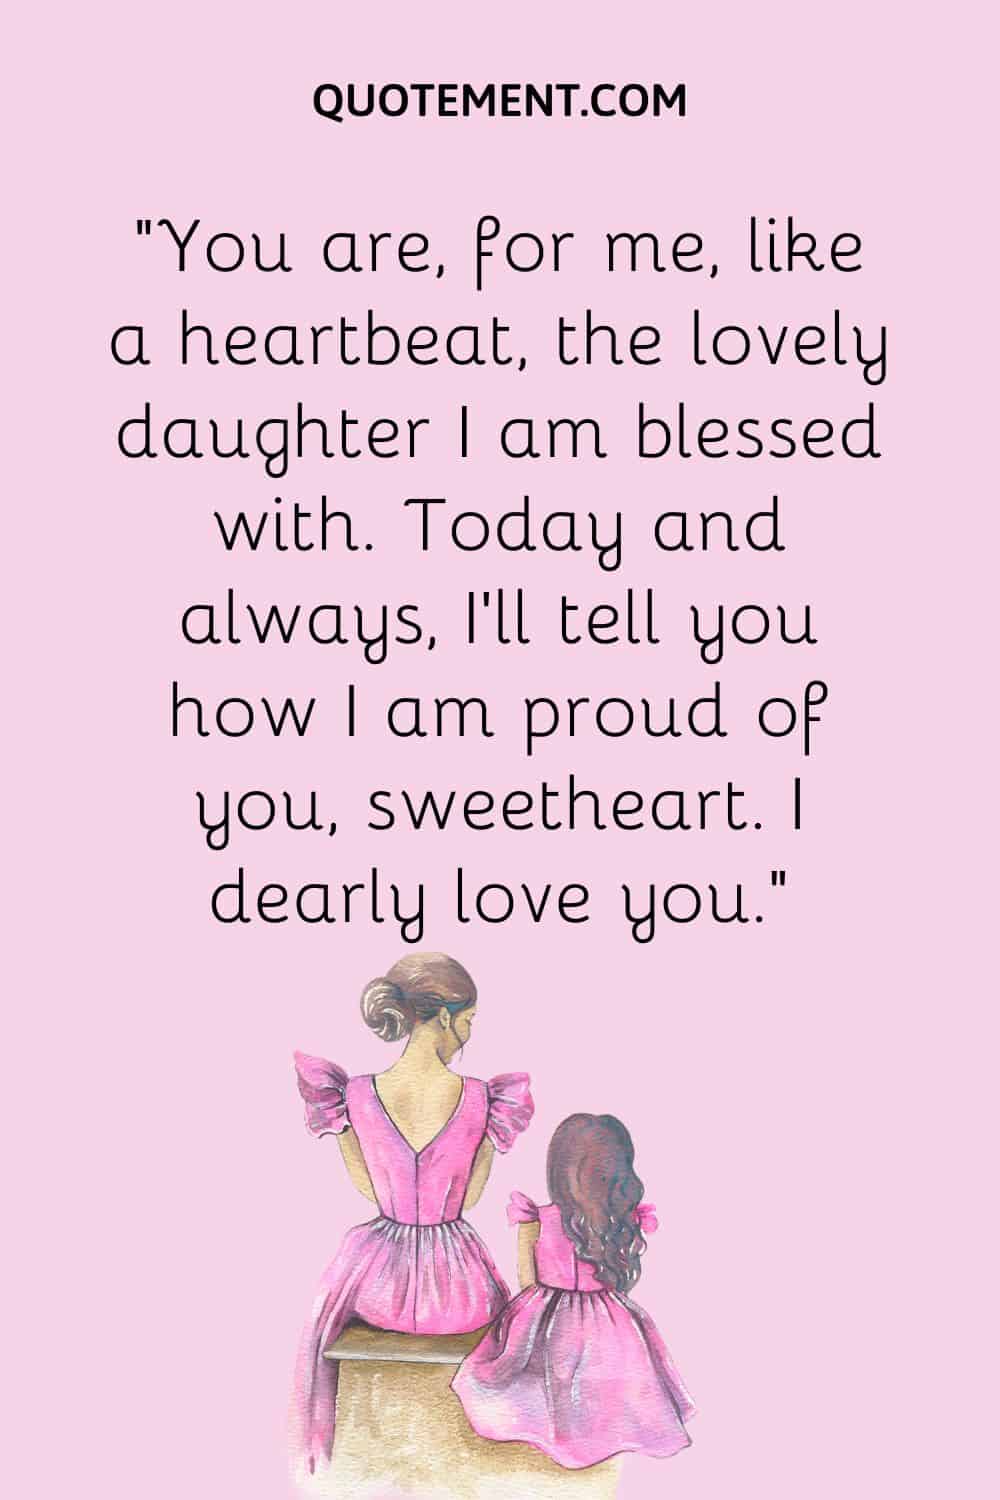 “You are, for me, like a heartbeat, the lovely daughter I am blessed with. Today and always, I’ll tell you how I am proud of you, sweetheart. I dearly love you.”